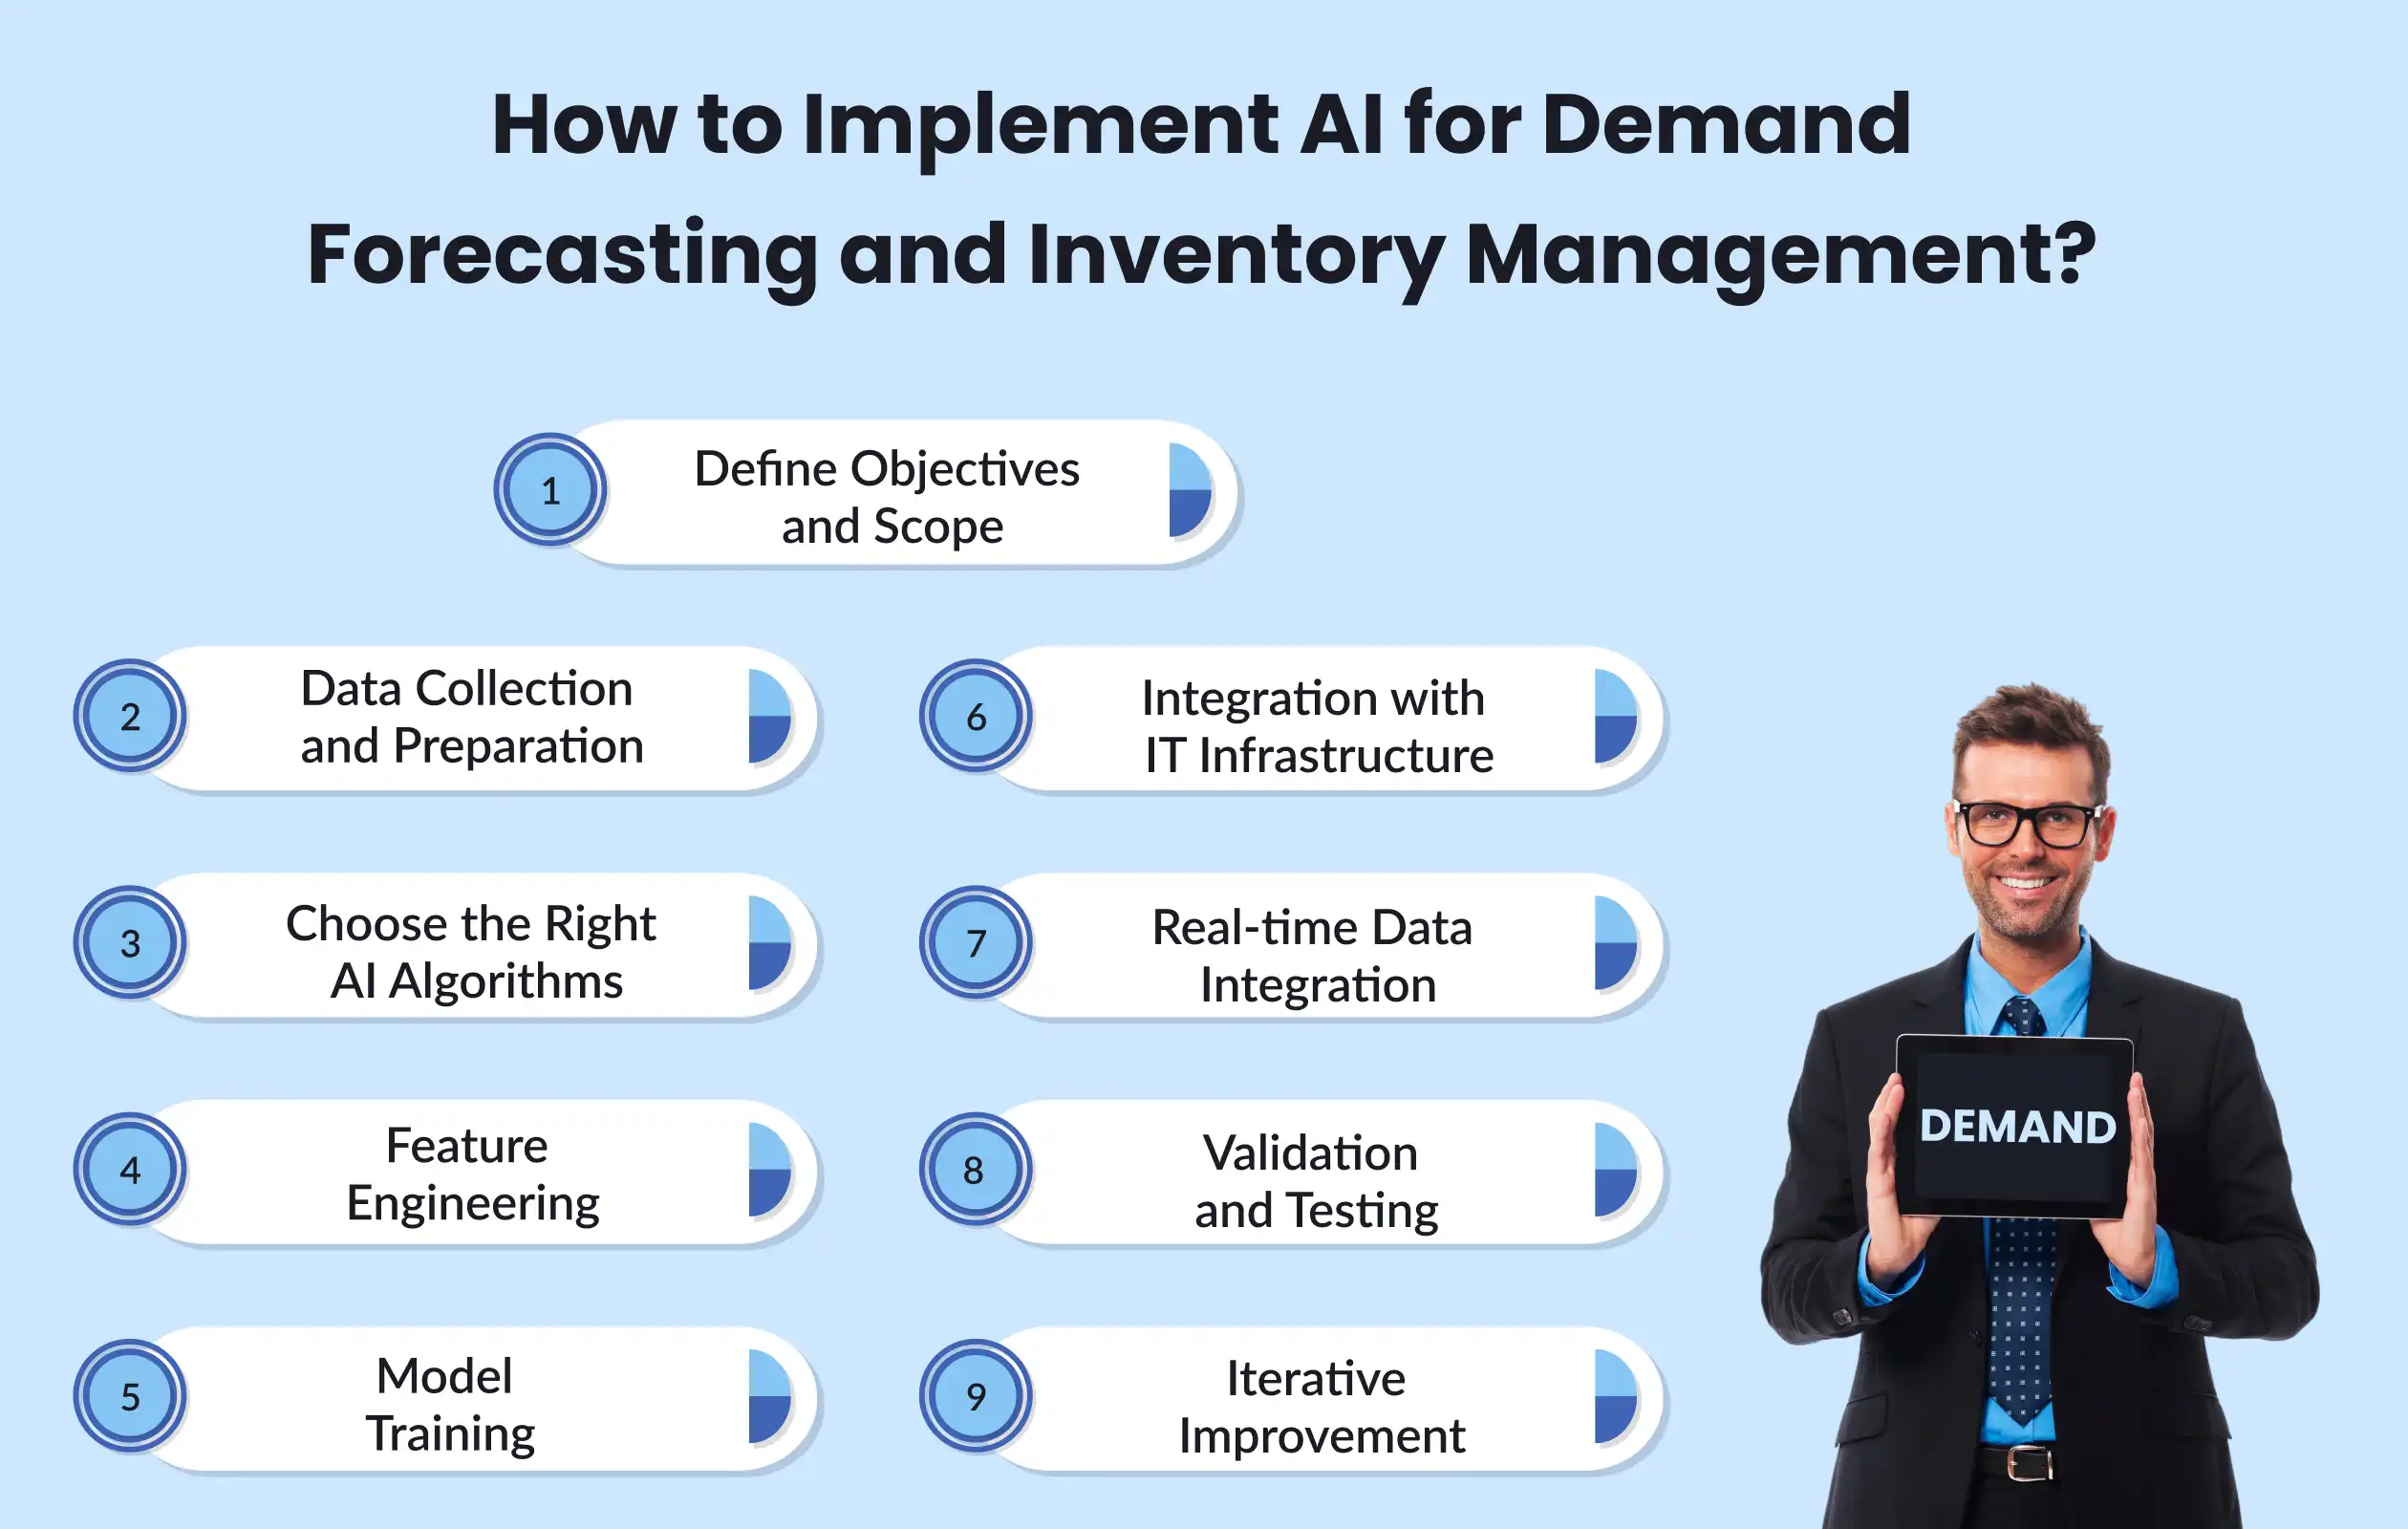 Implement AI for Demand Forecasting and Inventory Management